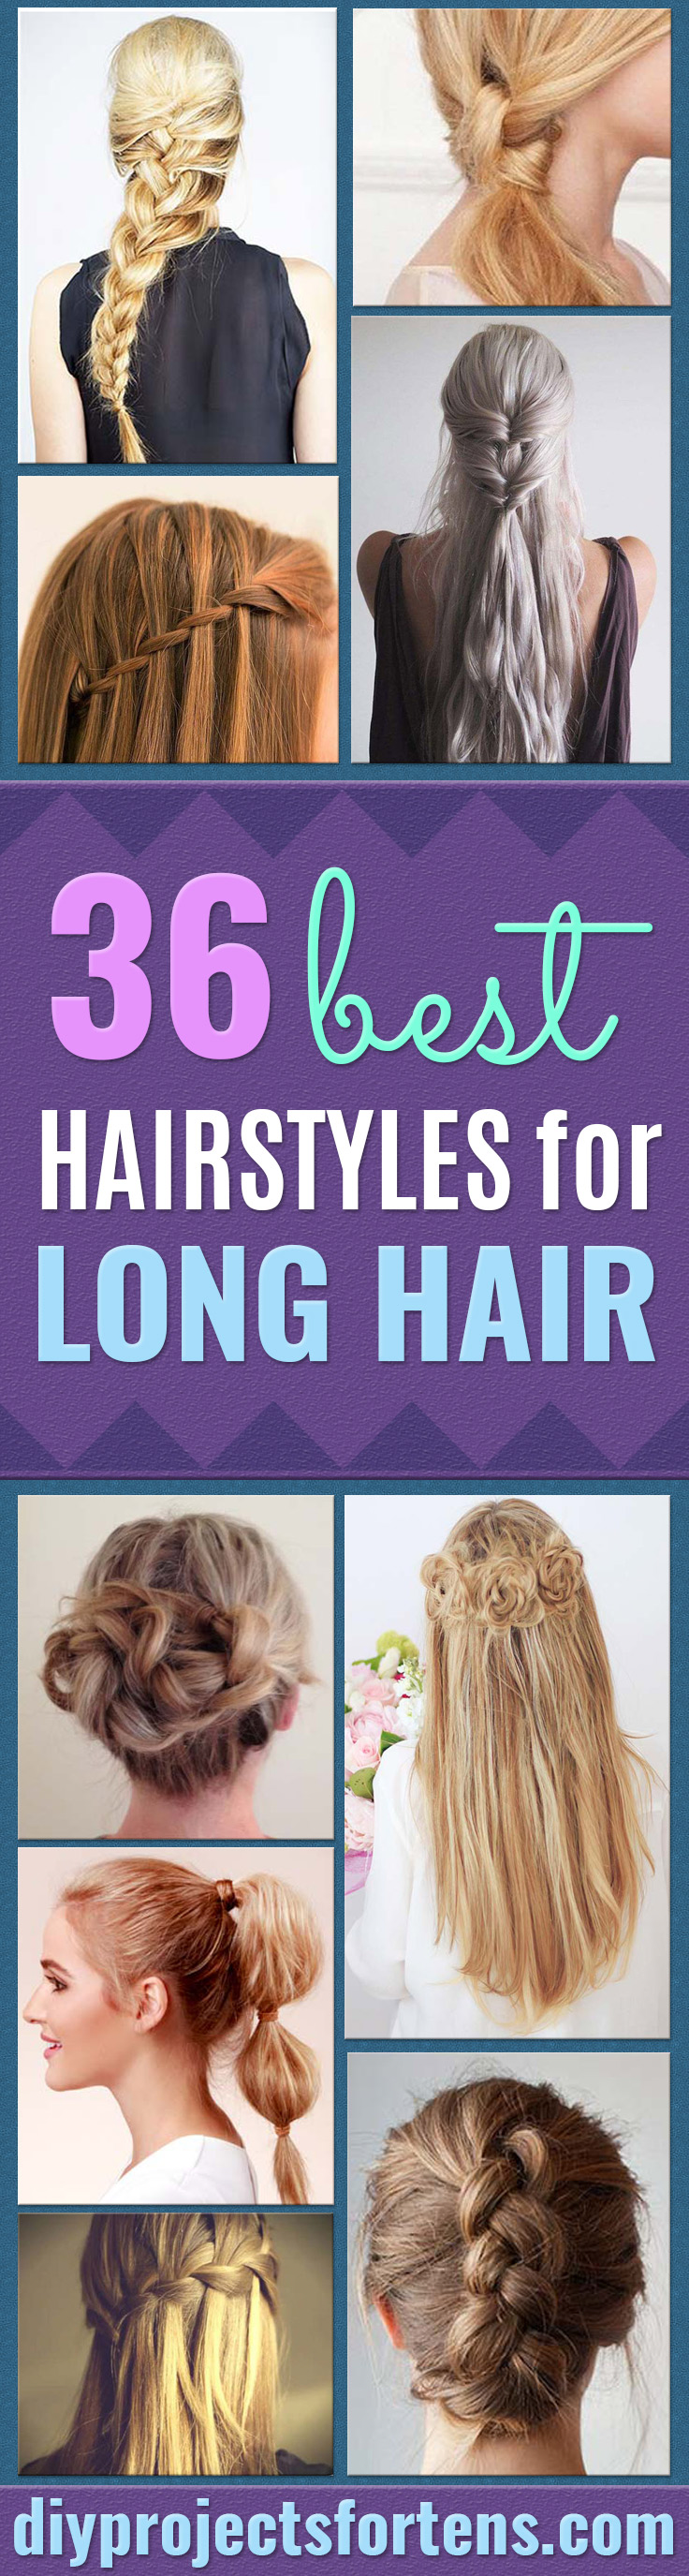 36 Best Hairstyles For Long Hair